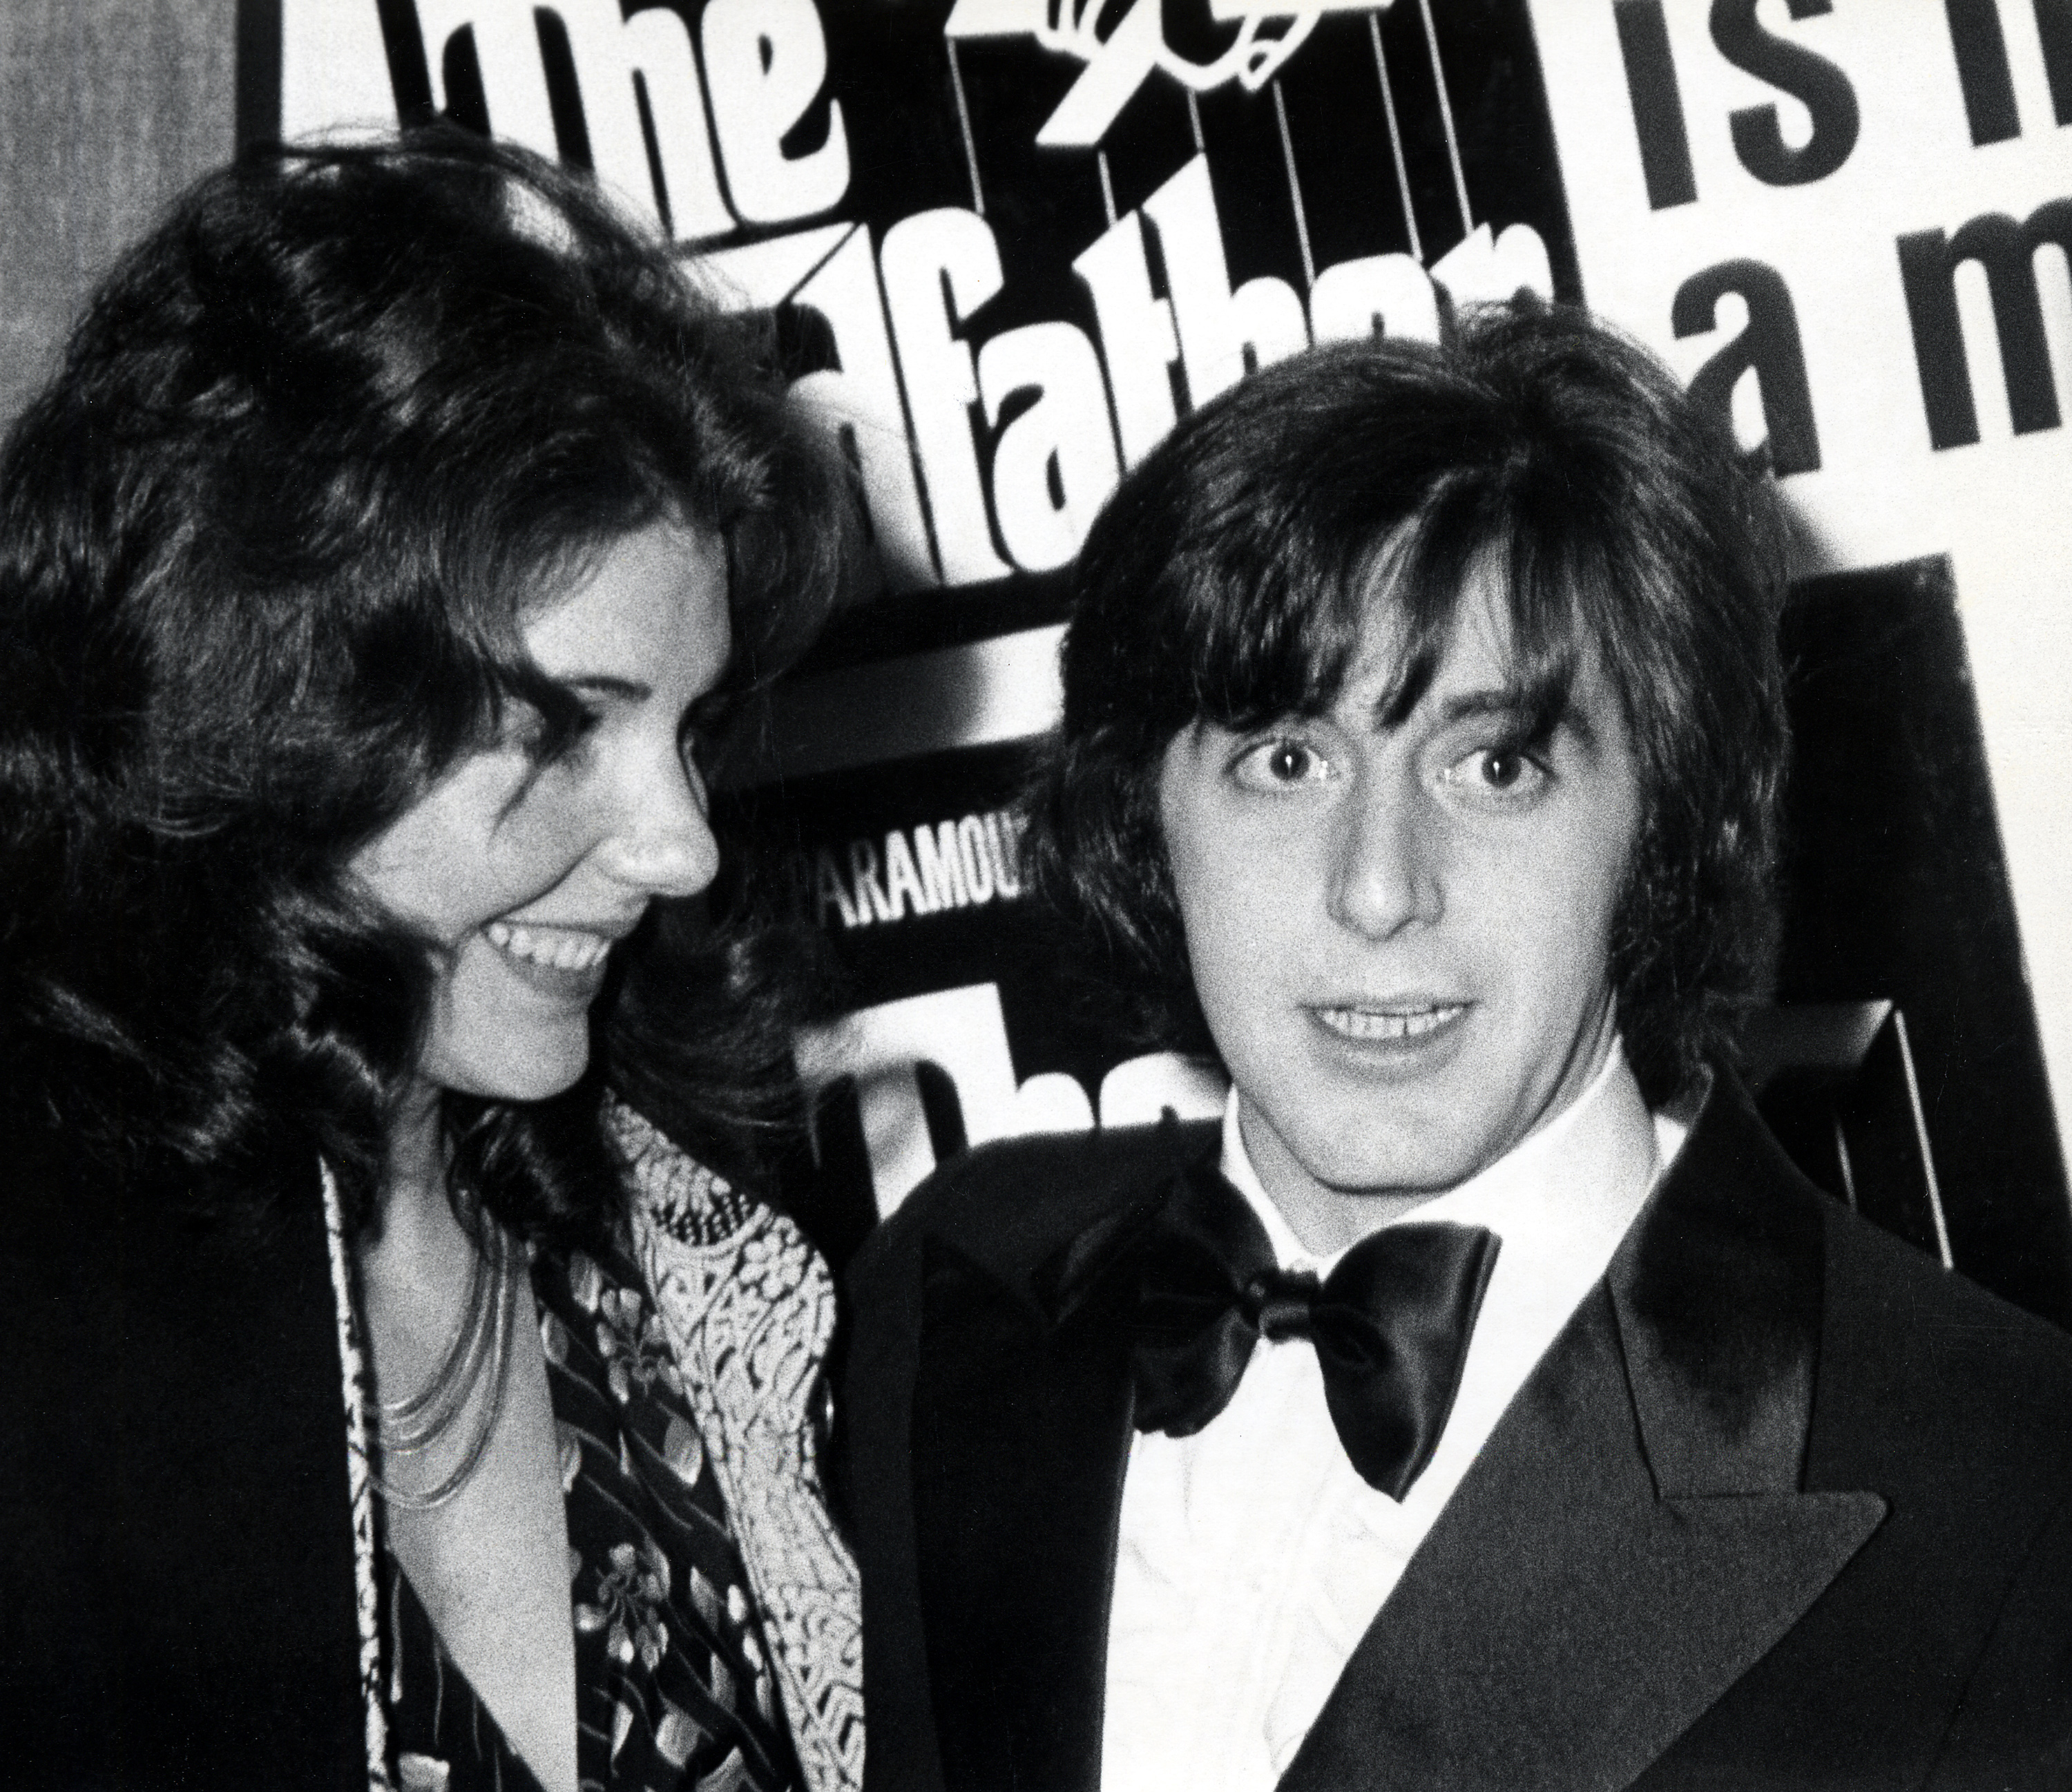 Al Pacino and Jill Clayburgh attend the premiere of "The Godfather" | Source: Getty Images